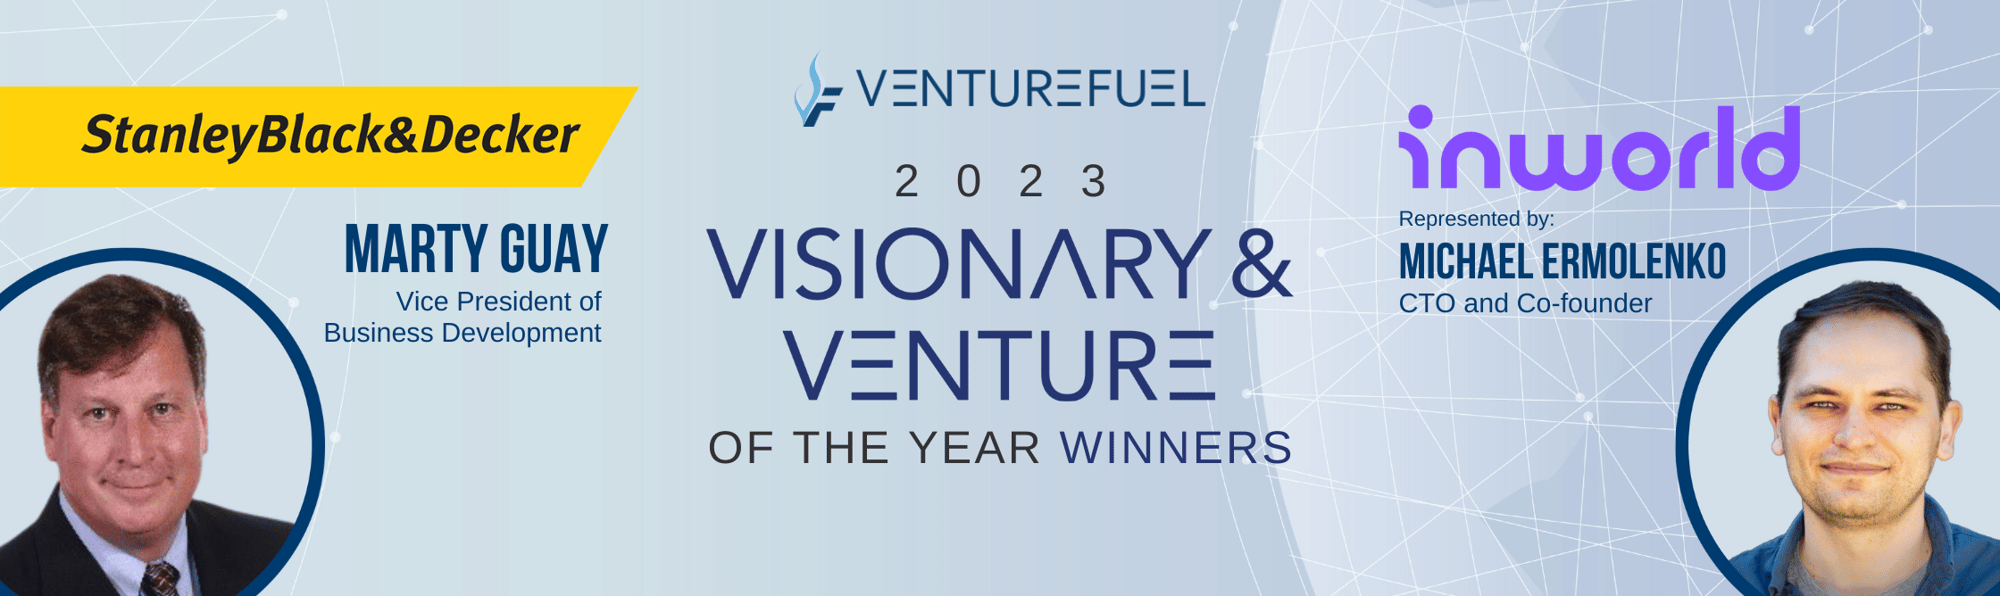 2023 VentureFuel Visionary and Venture of the Year